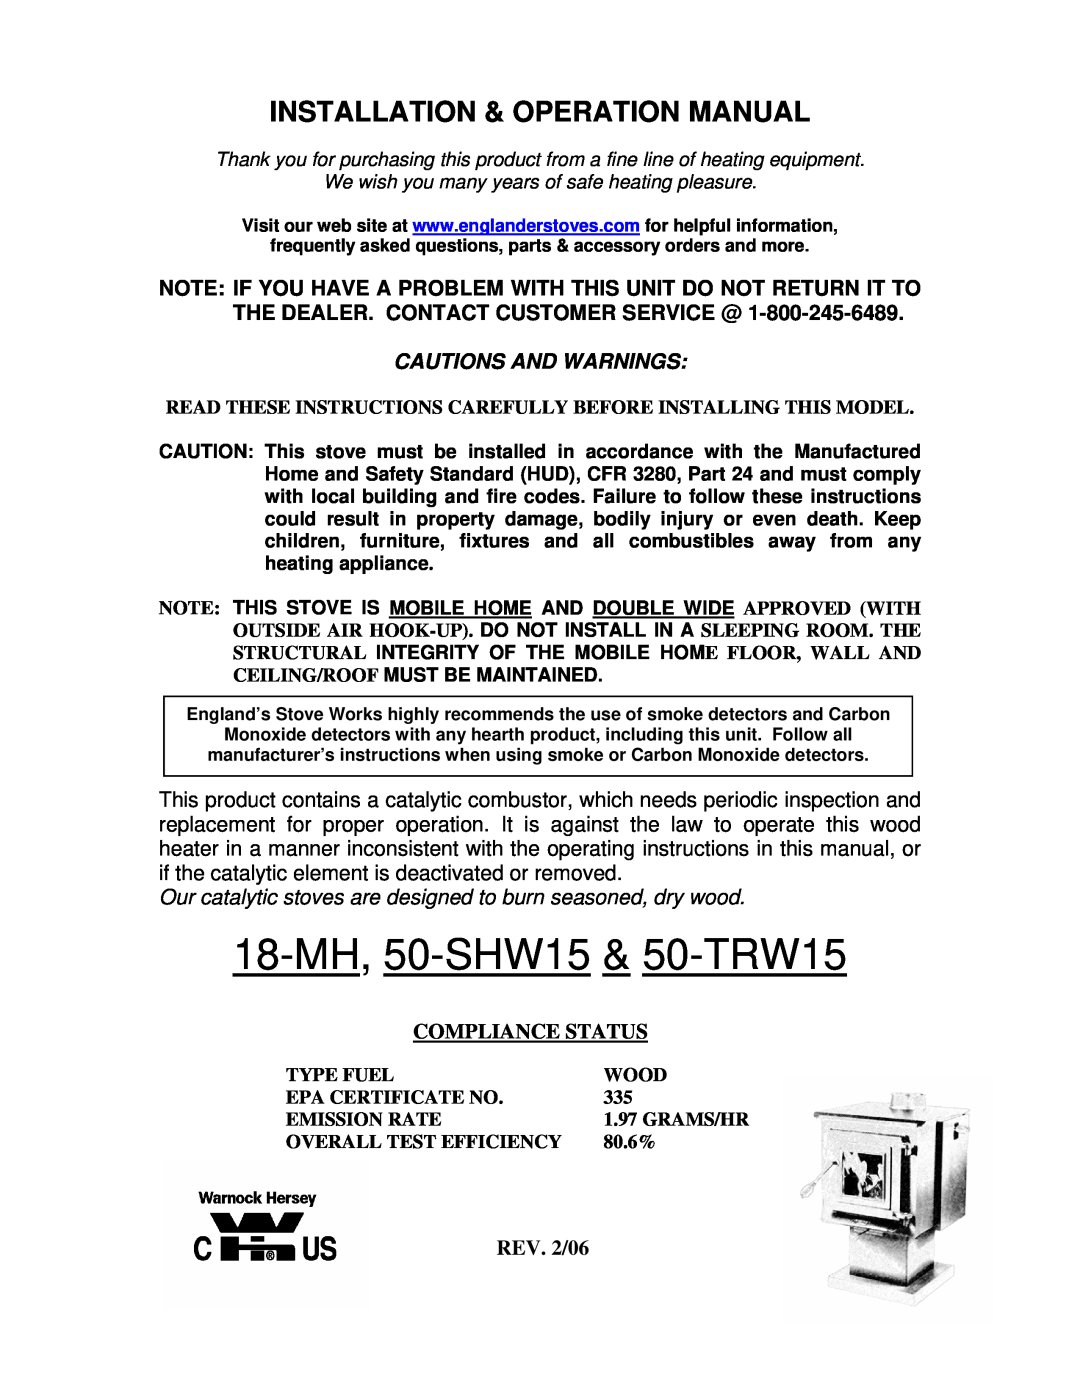 England's Stove Works operation manual Installation & Operation Manual, 18-MH, 50-SHW15 & 50-TRW15, Compliance Status 